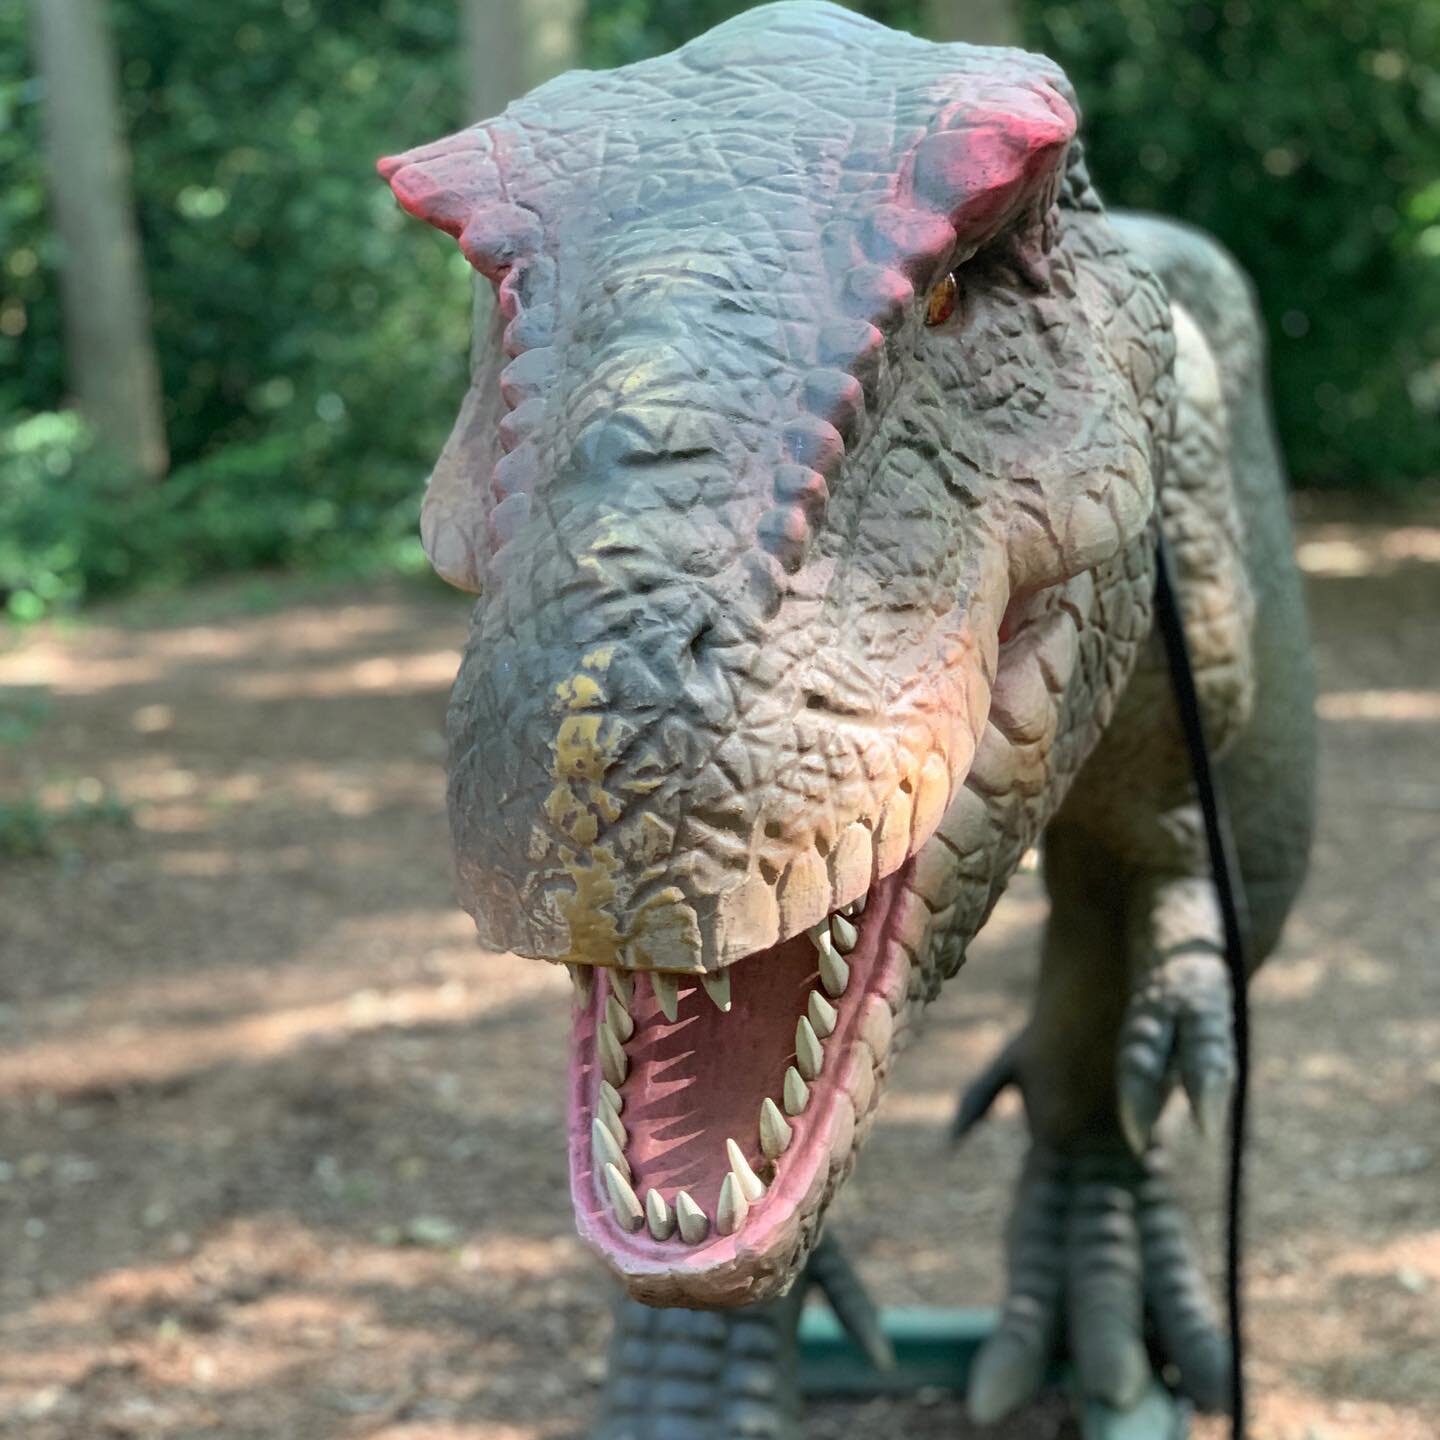 Went today to visit @jurassicencounter2021 team. They are getting ready for opening next Saturday 24/7. We are proud to work with them during London tour of their event. You will be able to spend day out in the park surrounded by over 50 giant Dinosa